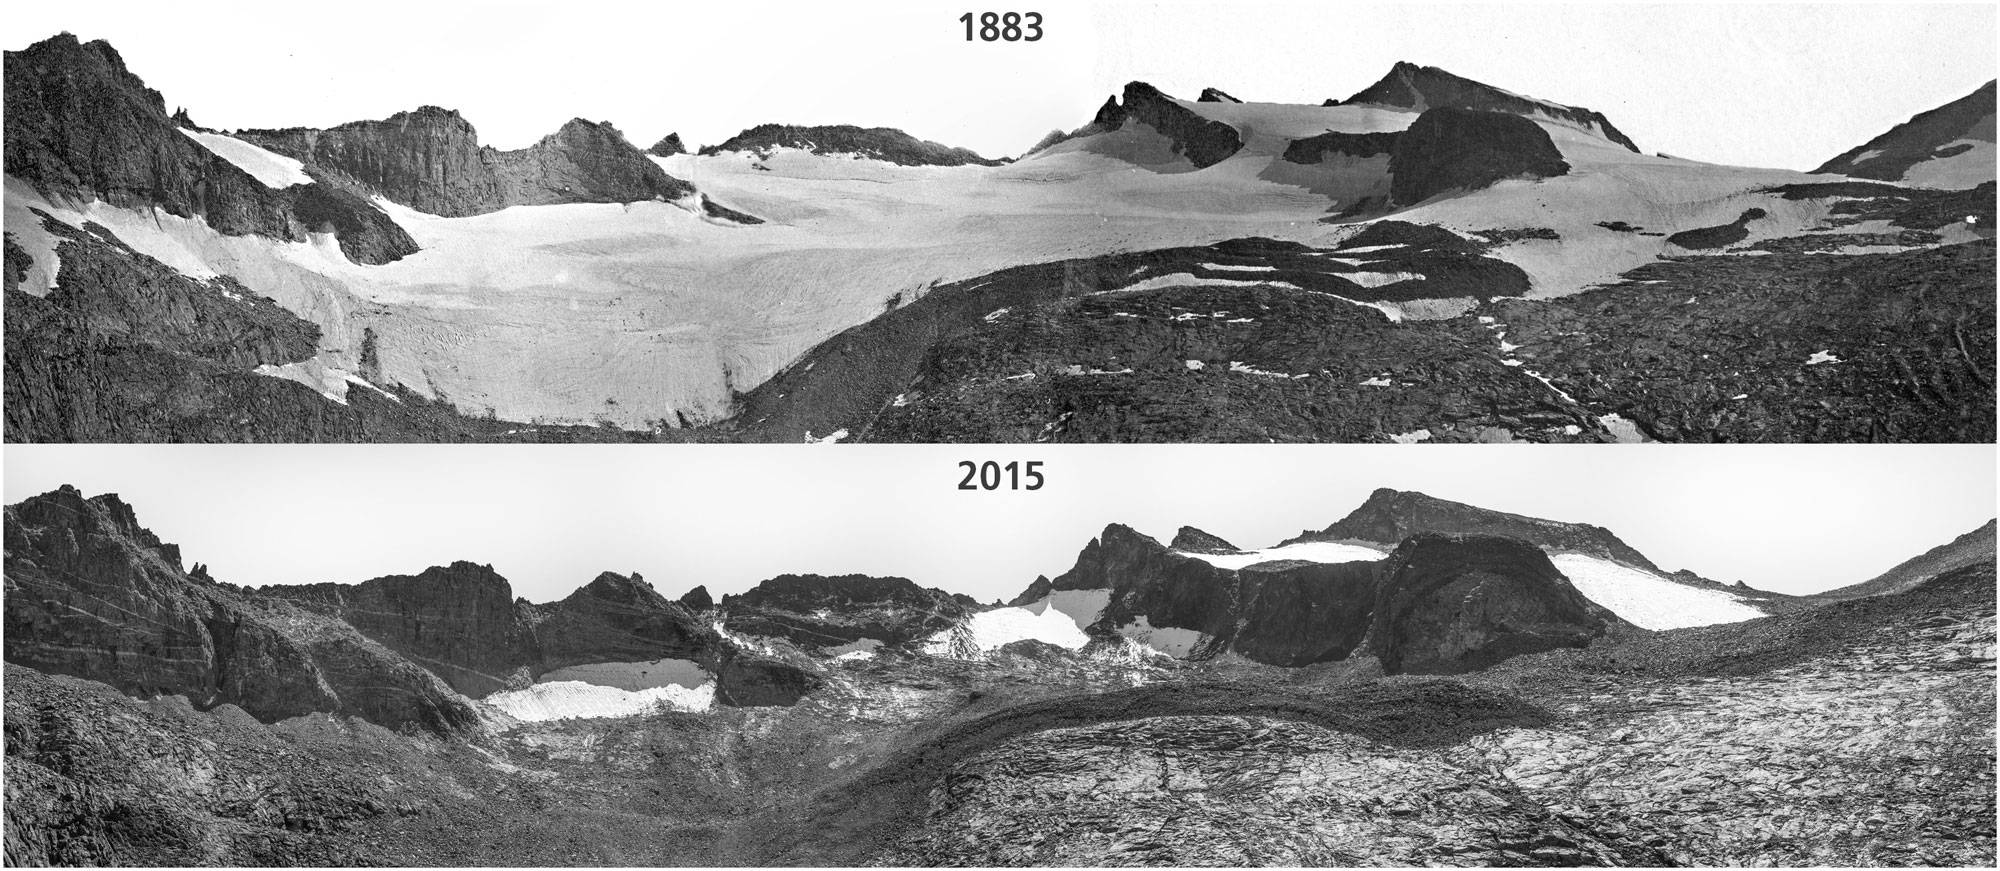 Photos of Lyell Glacier, Yosemite National Park, California, at two points in time: 1883 and 2015. Comparison of the photos shows the retreat of the glacier between 1883 and 2015.